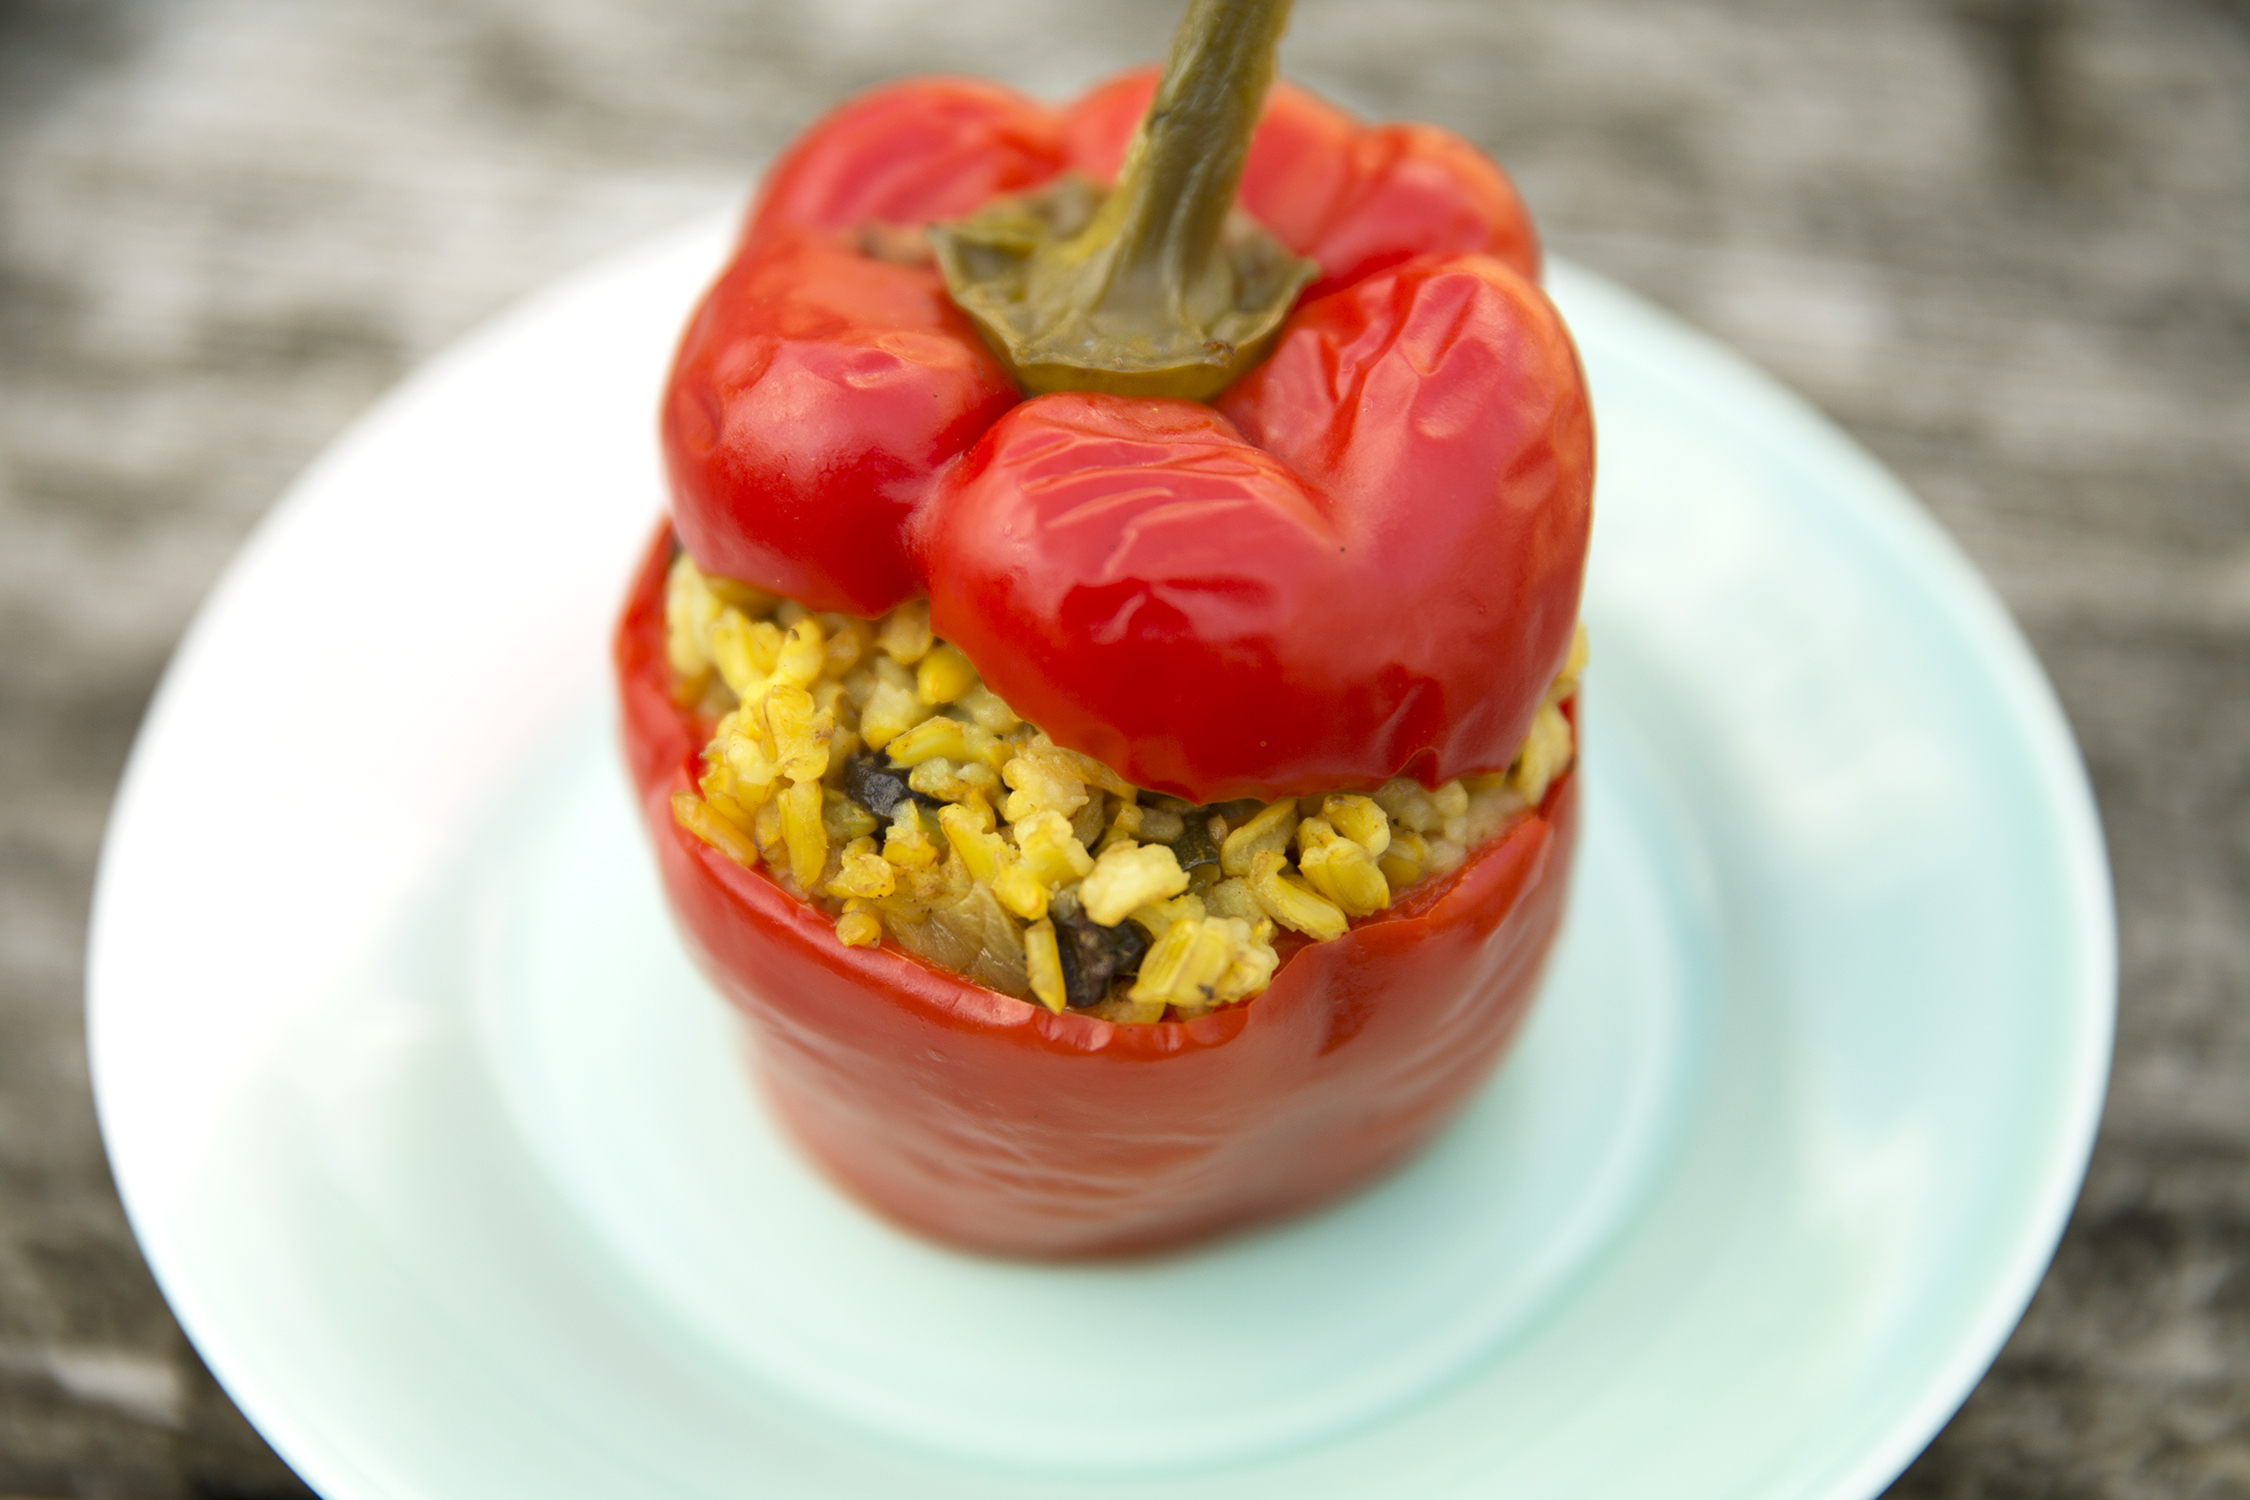 stuffed pepper - why not try something different for your roast dinner? 